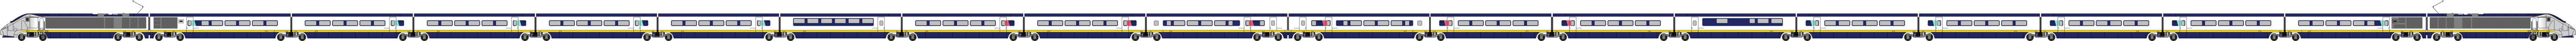 Illustration of a Three Capitals set in original Eurostar livery with SNCF branding